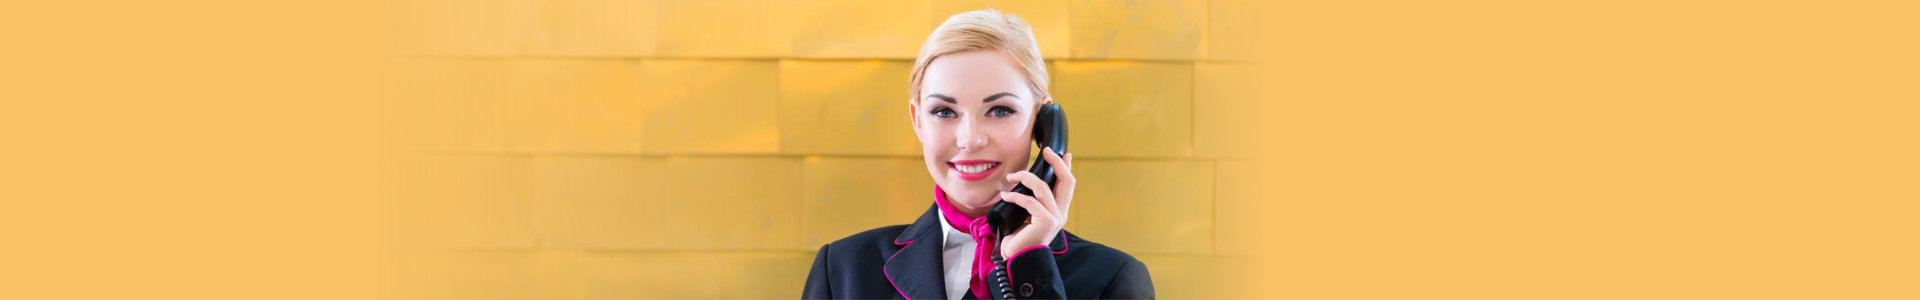 hotel receptionist with phone on front desk